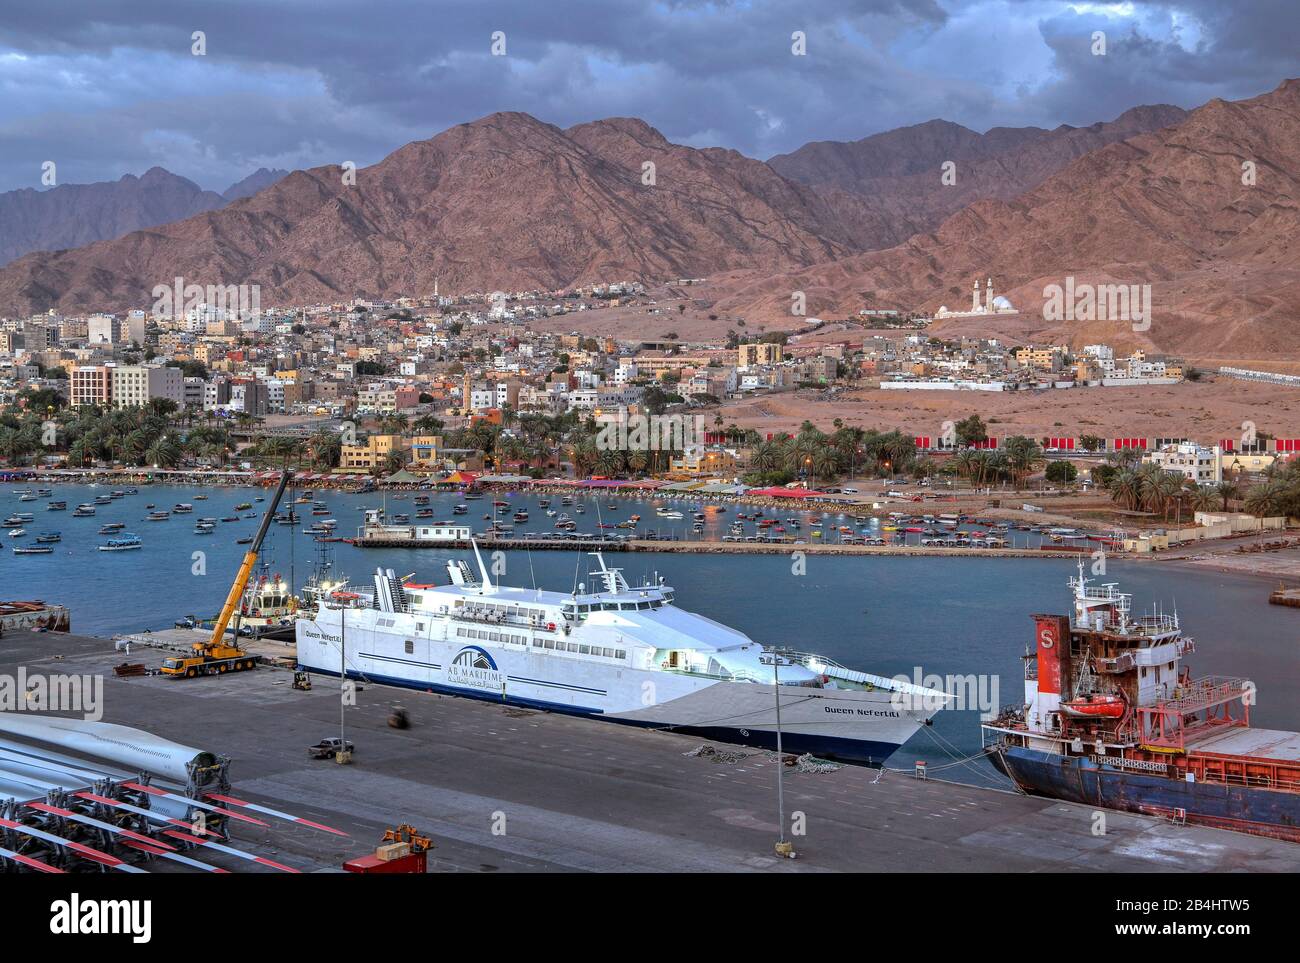 Ferry in the harbor against the city with water front and mountains, Aqaba Aqaba, Gulf of Aqaba, Red Sea, Jordan Stock Photo